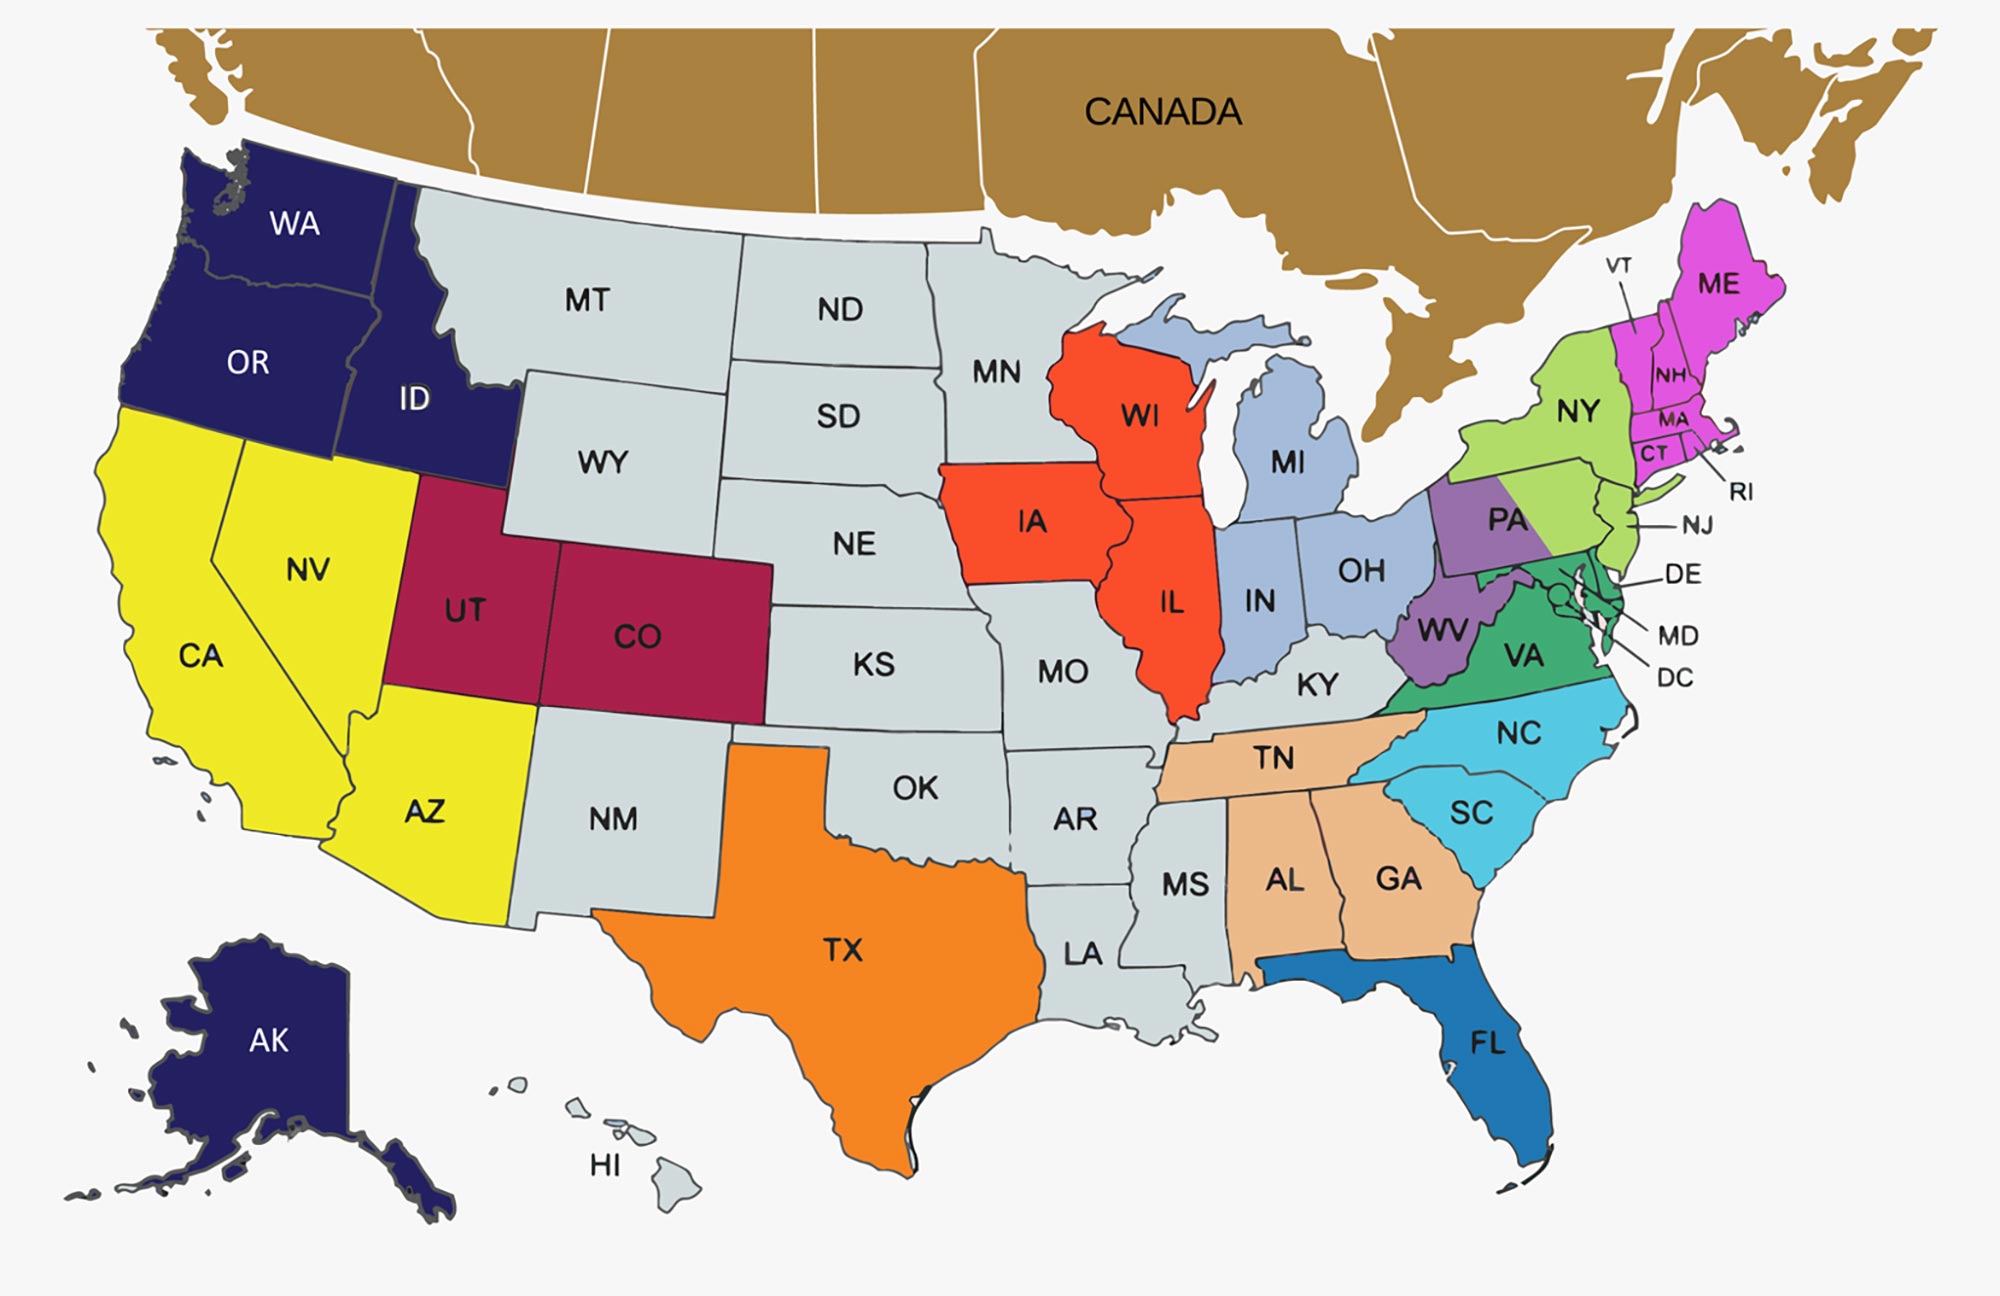 Map of the united states and canada showing different colored territories associated with specific sales reps.